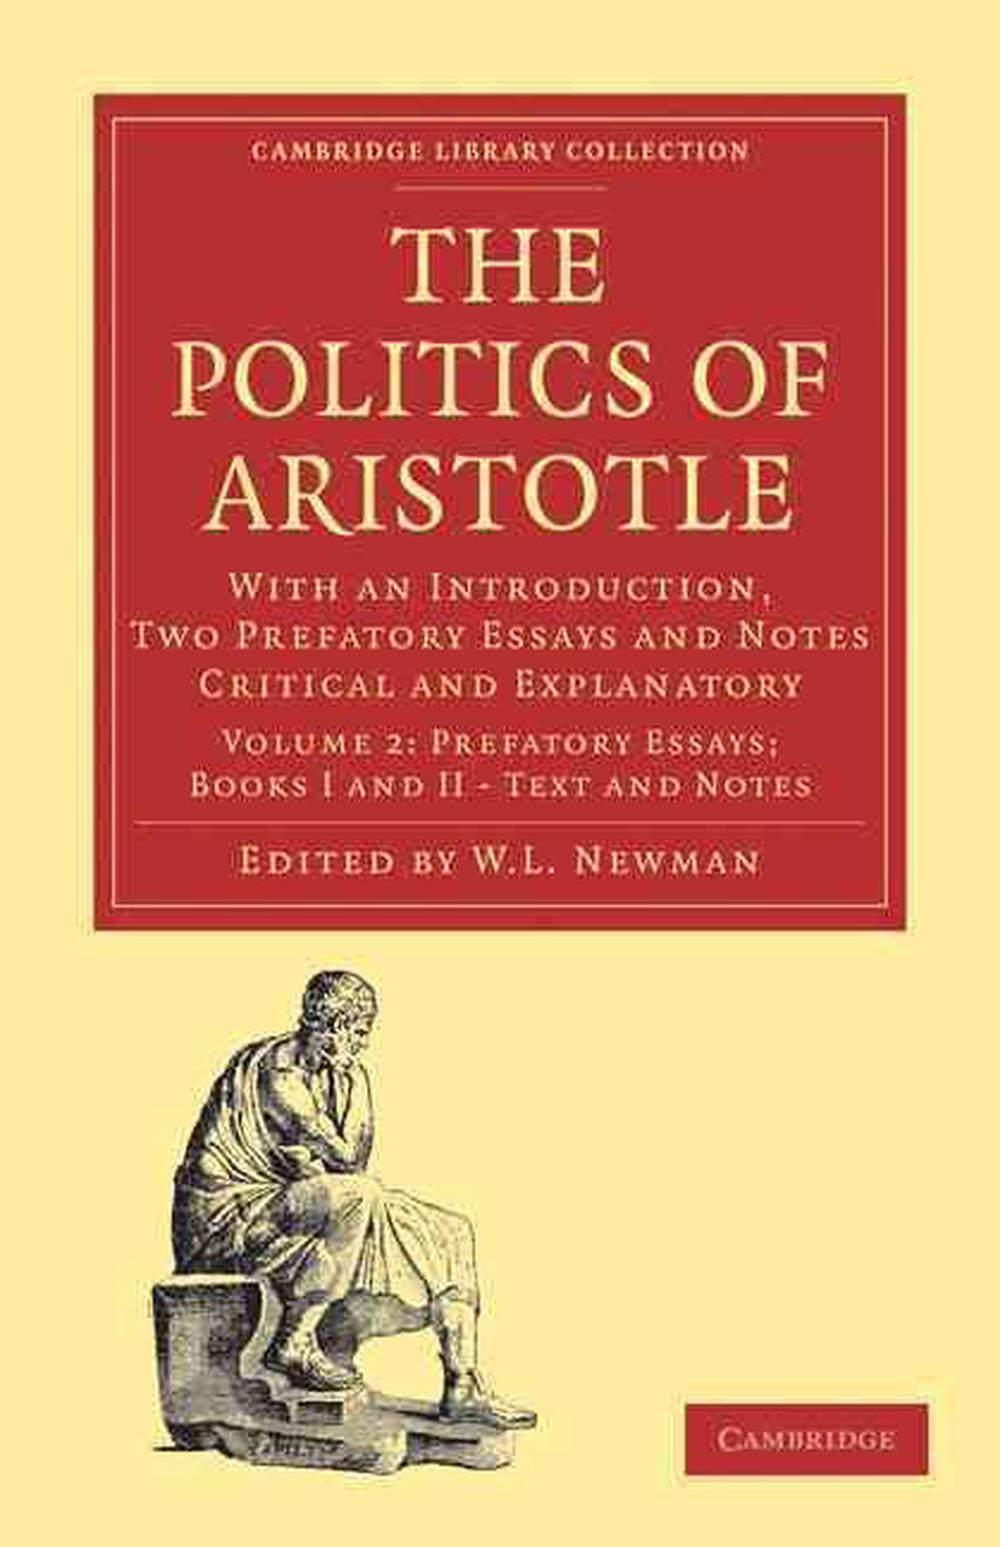 research books about aristotle